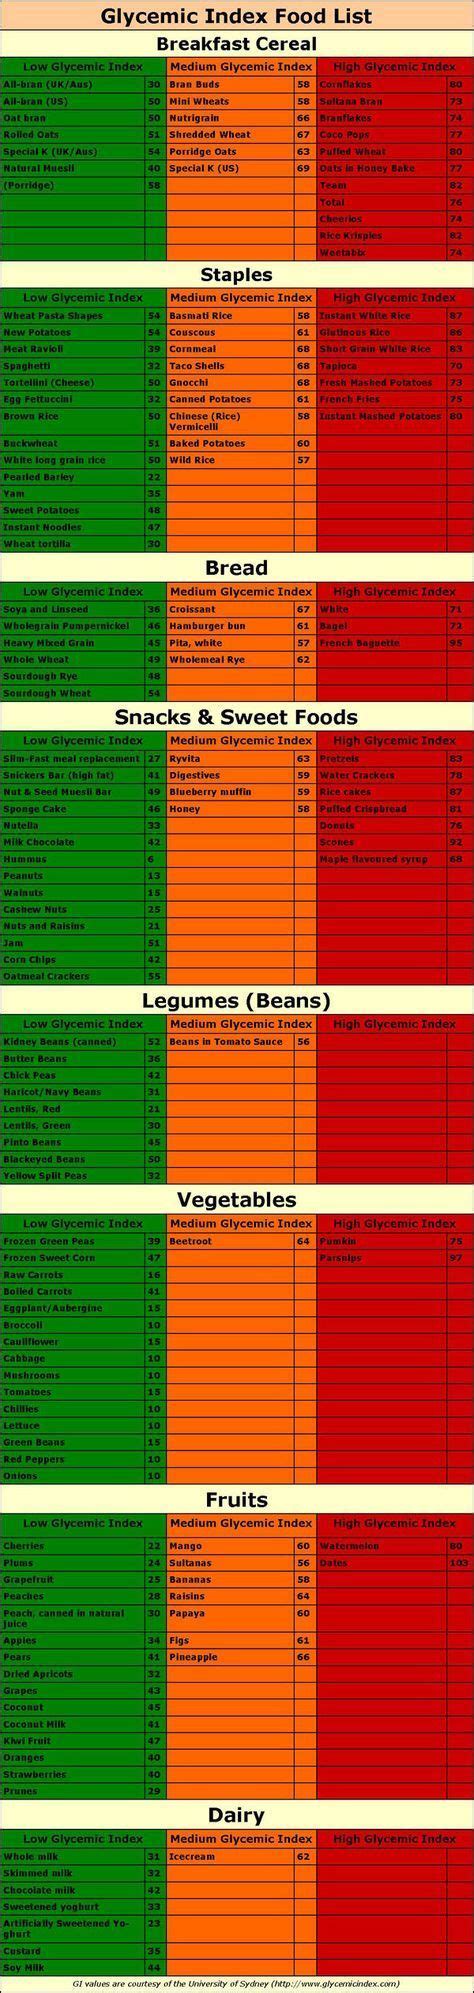 Glycemic Index Food List With Slow And Fast Carbs Low Glycemic Foods